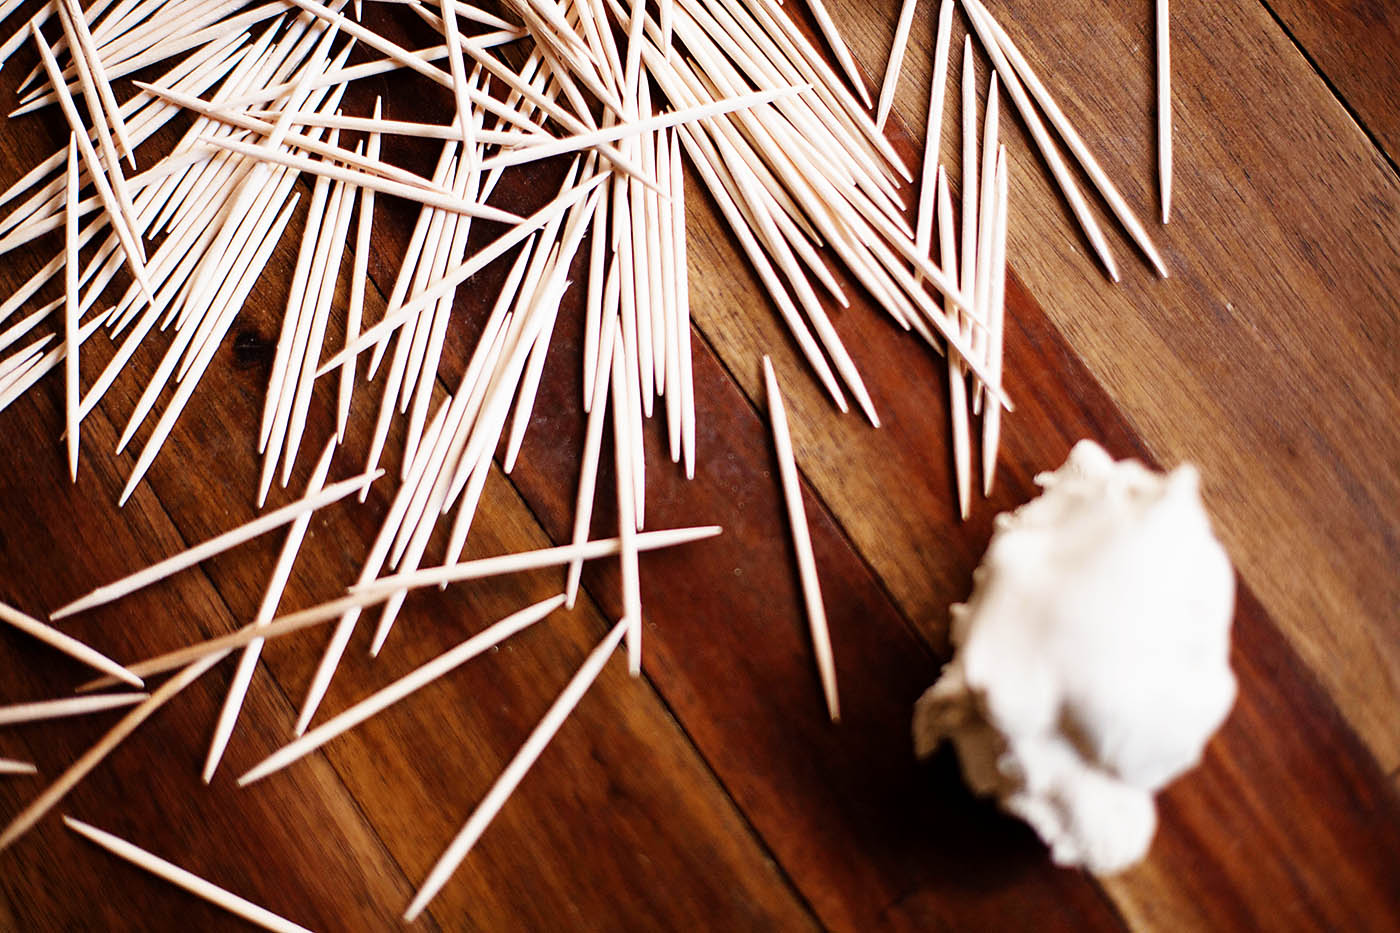 Toothpick and dough construction